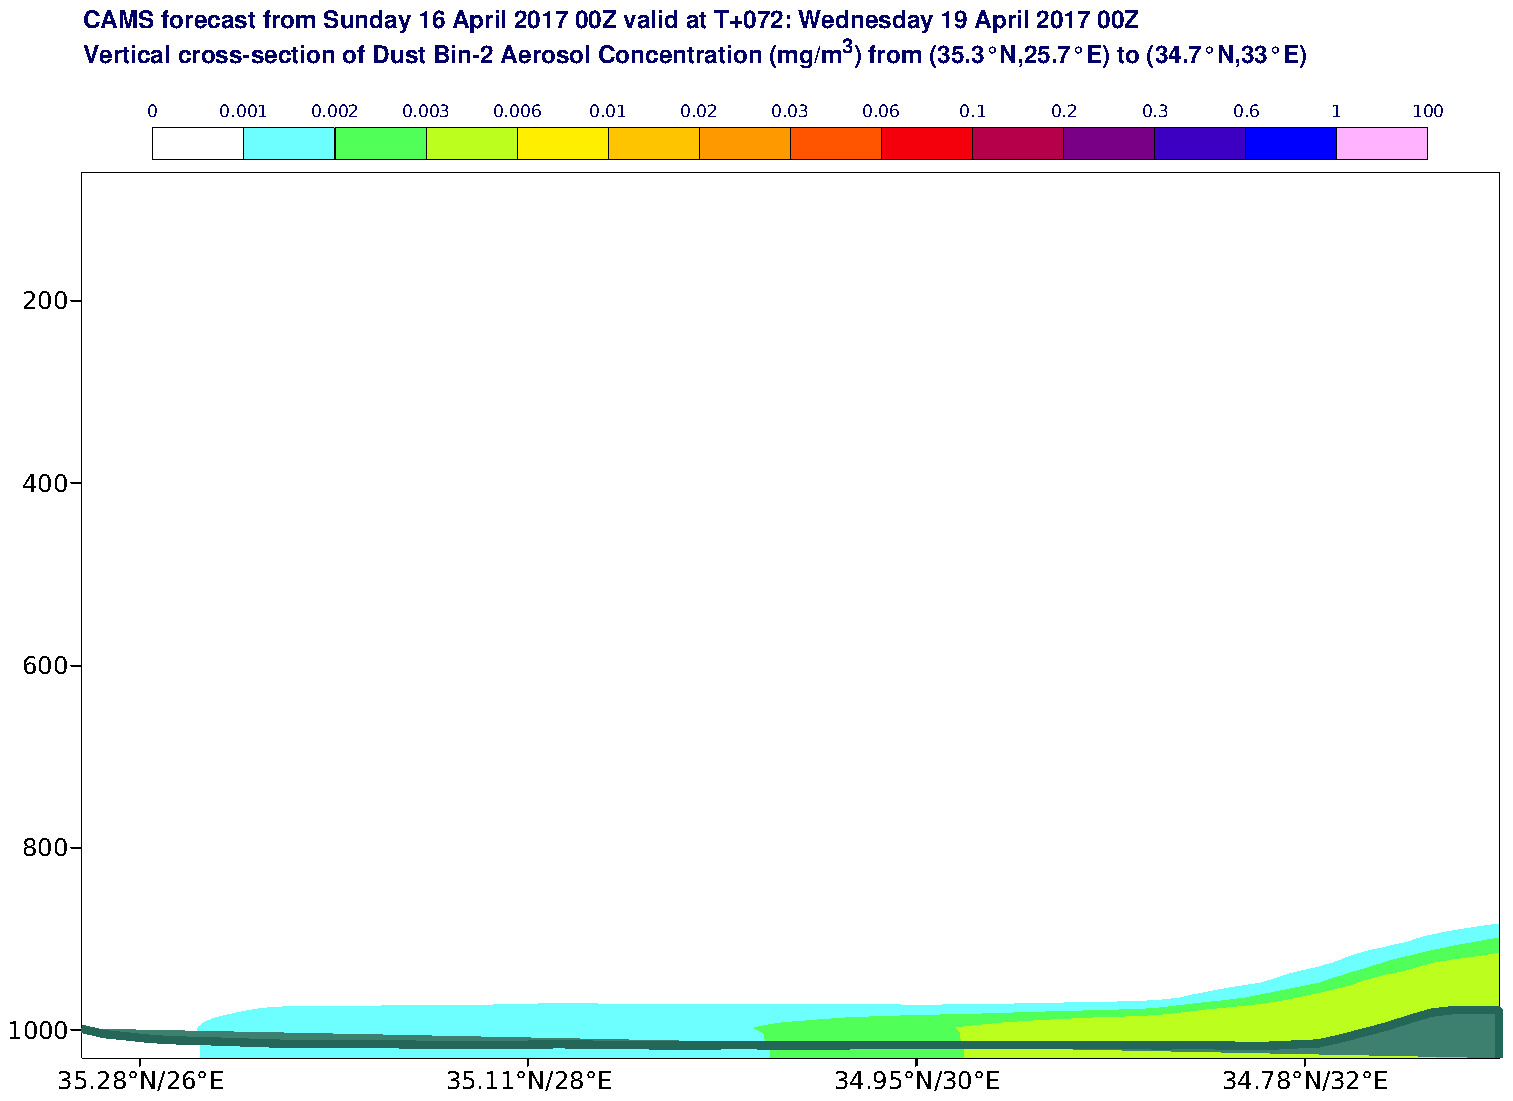 Vertical cross-section of Dust Bin-2 Aerosol Concentration (mg/m3) valid at T72 - 2017-04-19 00:00